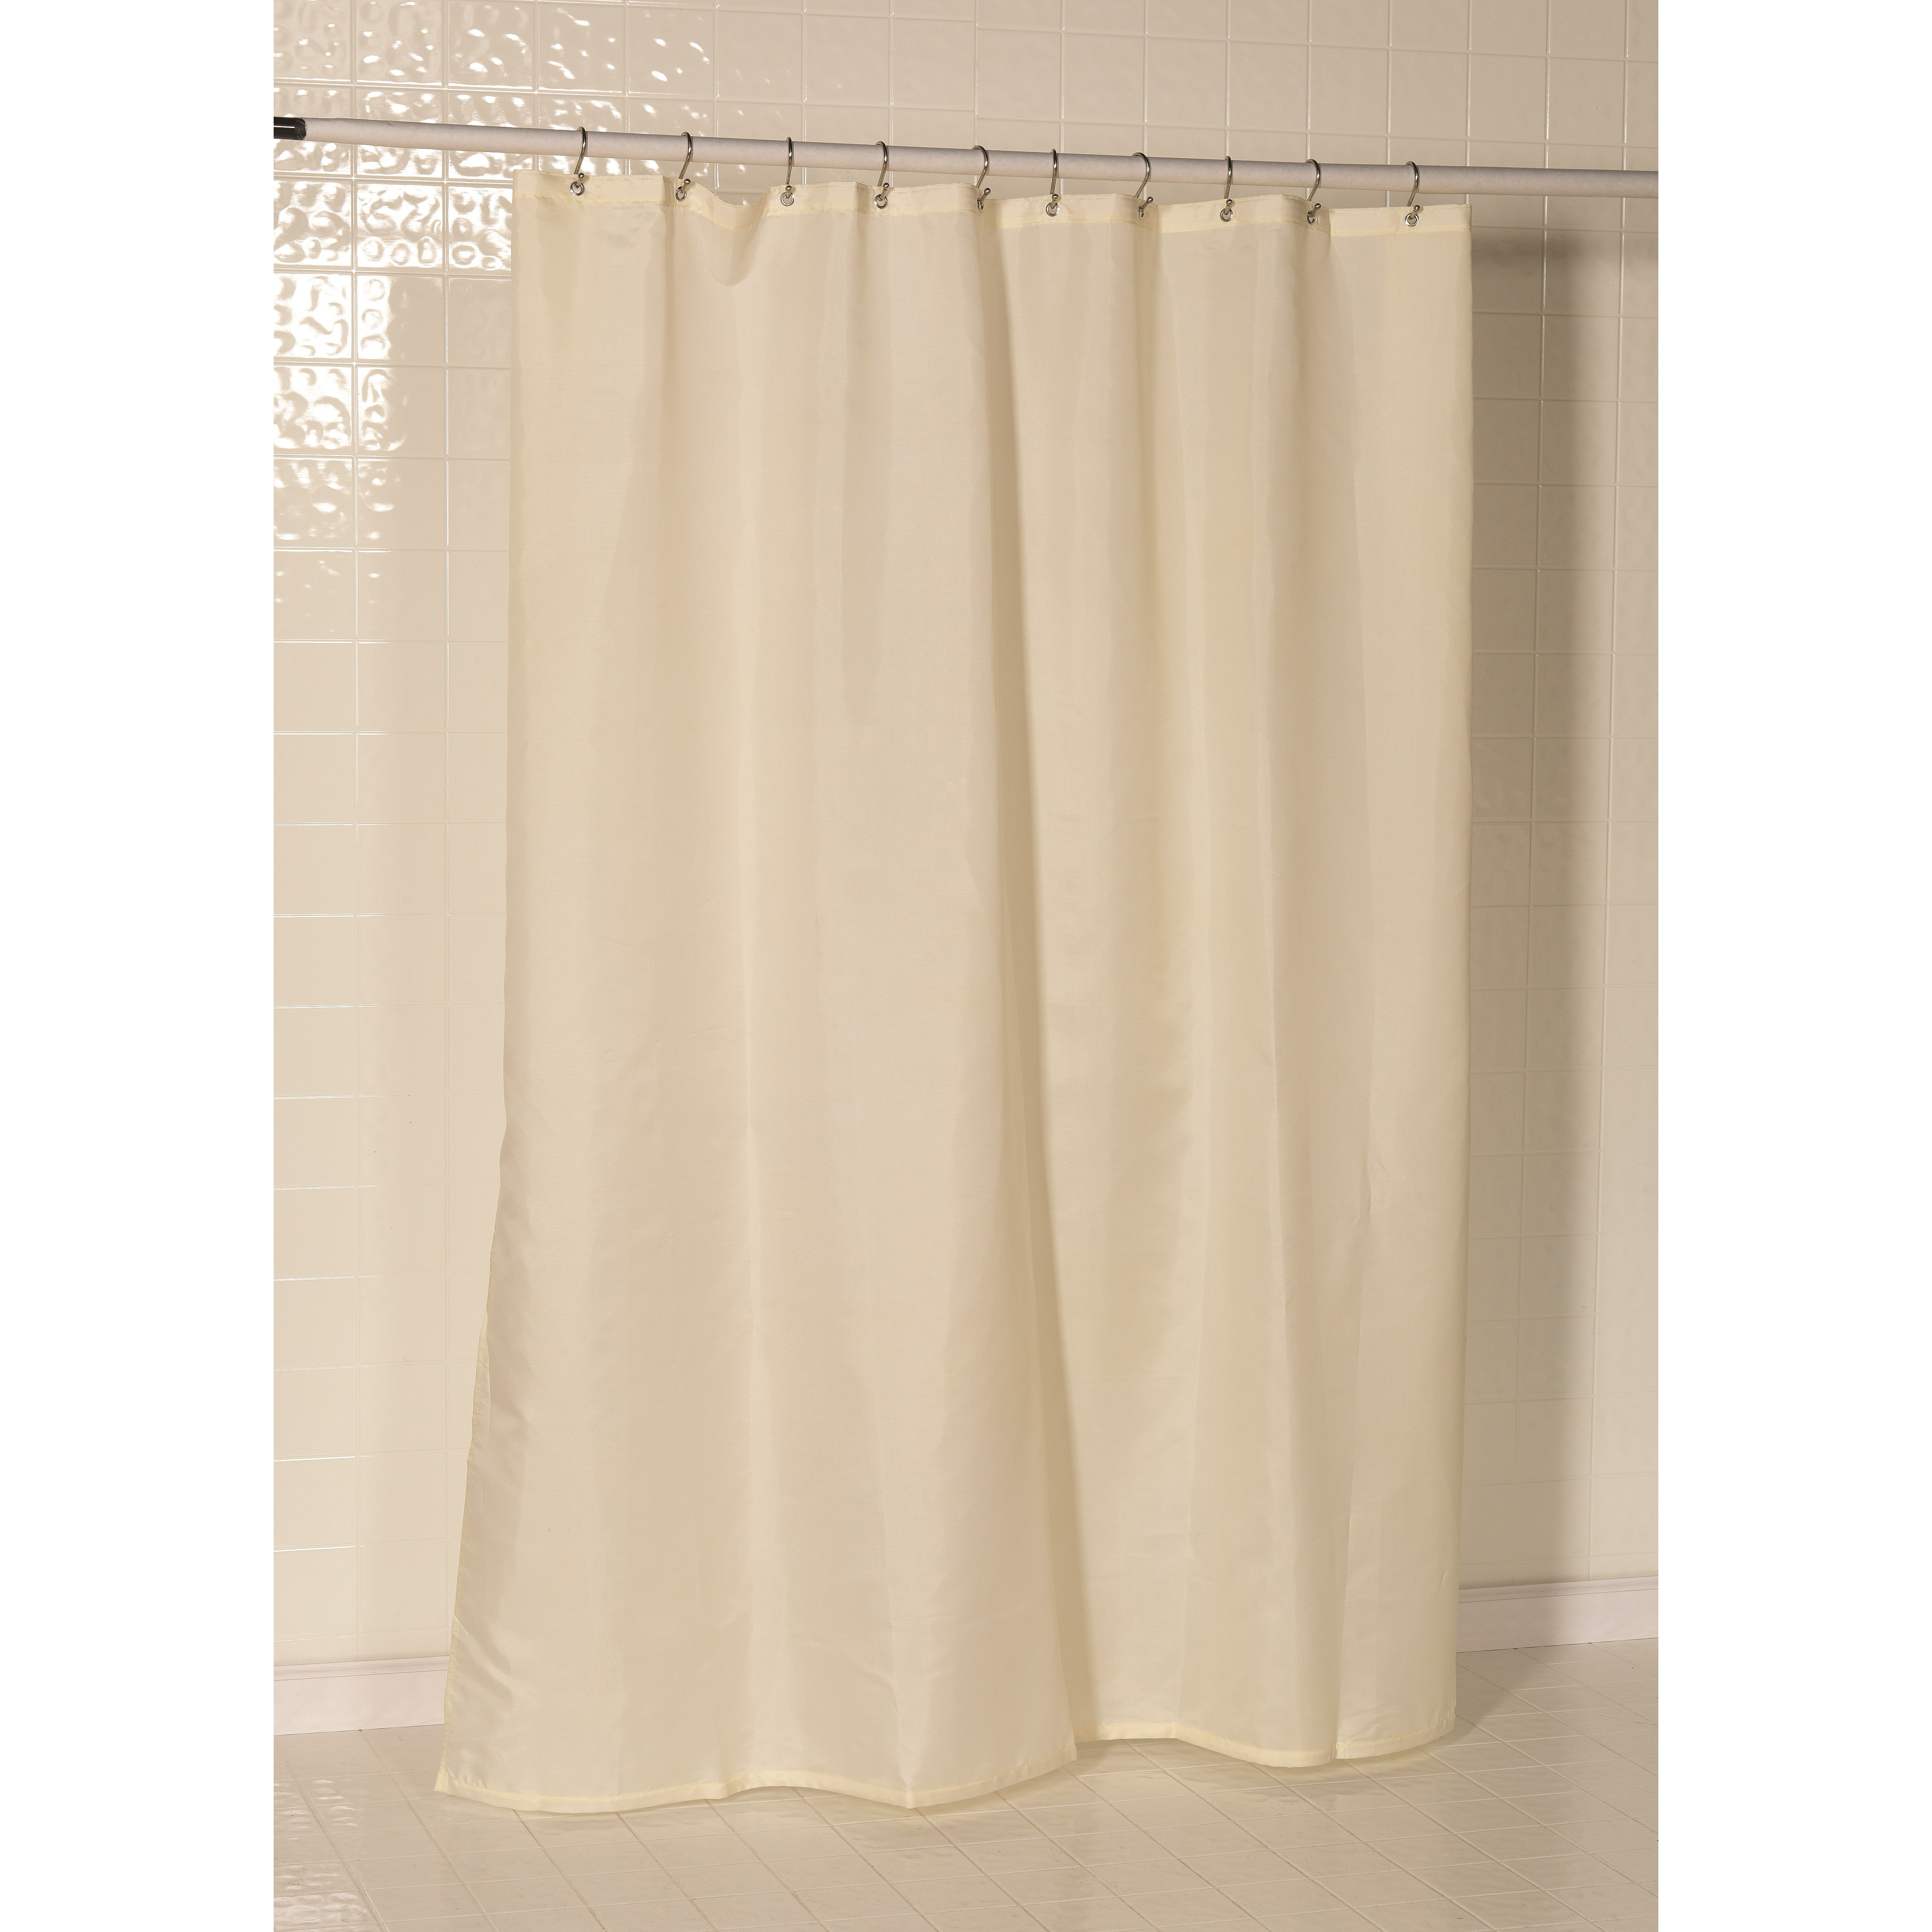 Natural Cotton Shower Curtain Peva Shower Curtain Liner